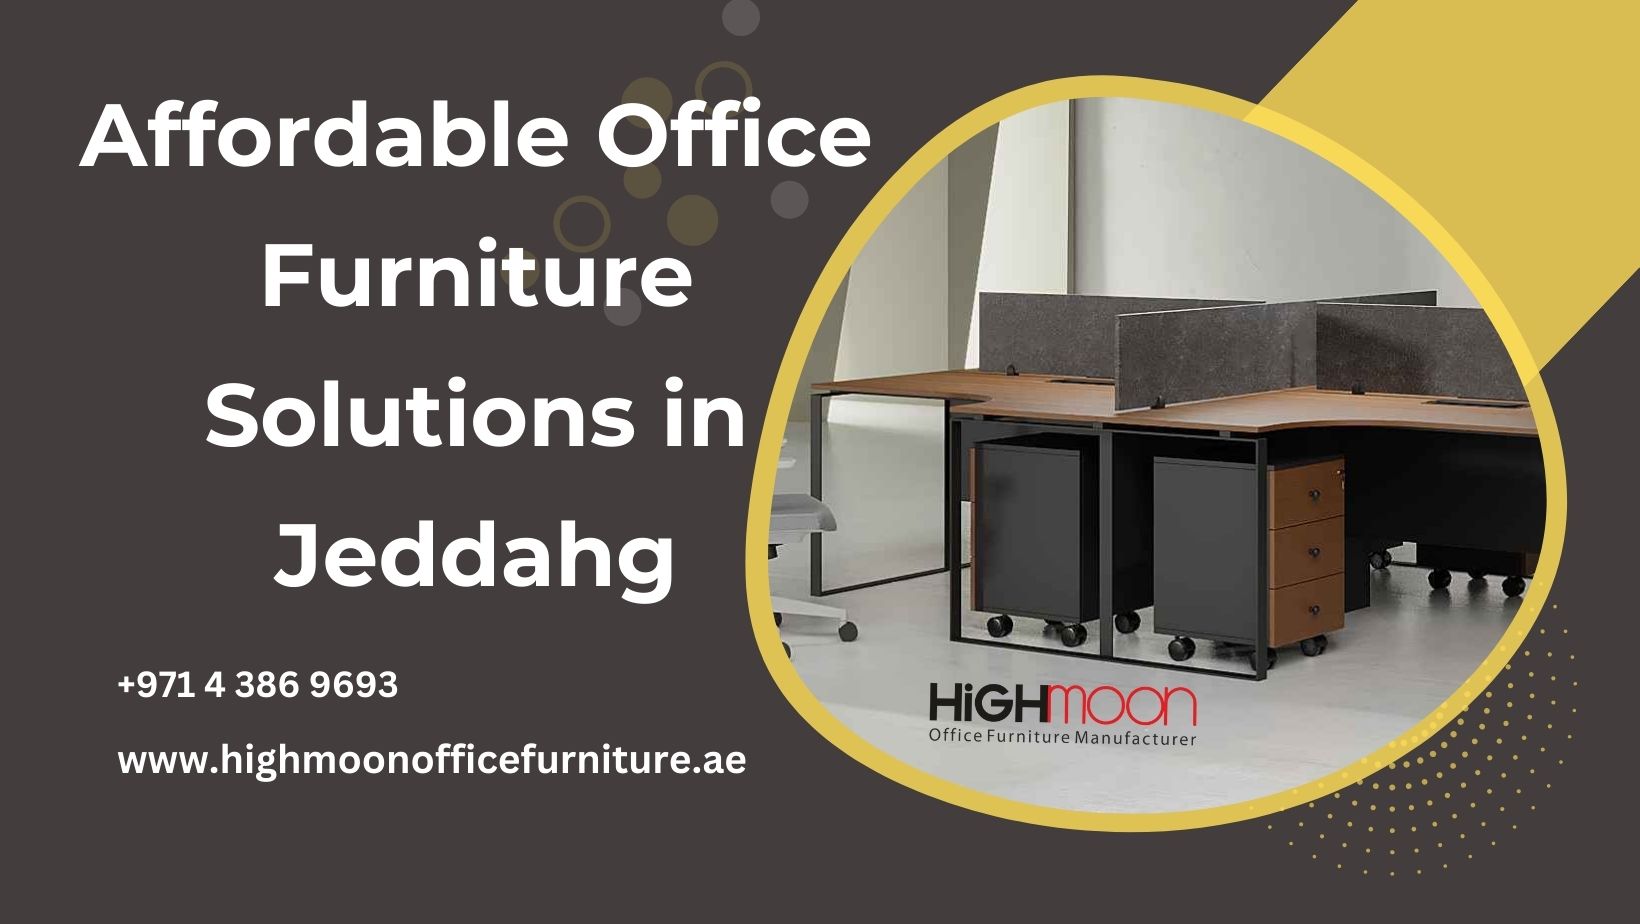 Affordable Office Furniture Solutions in Jeddah